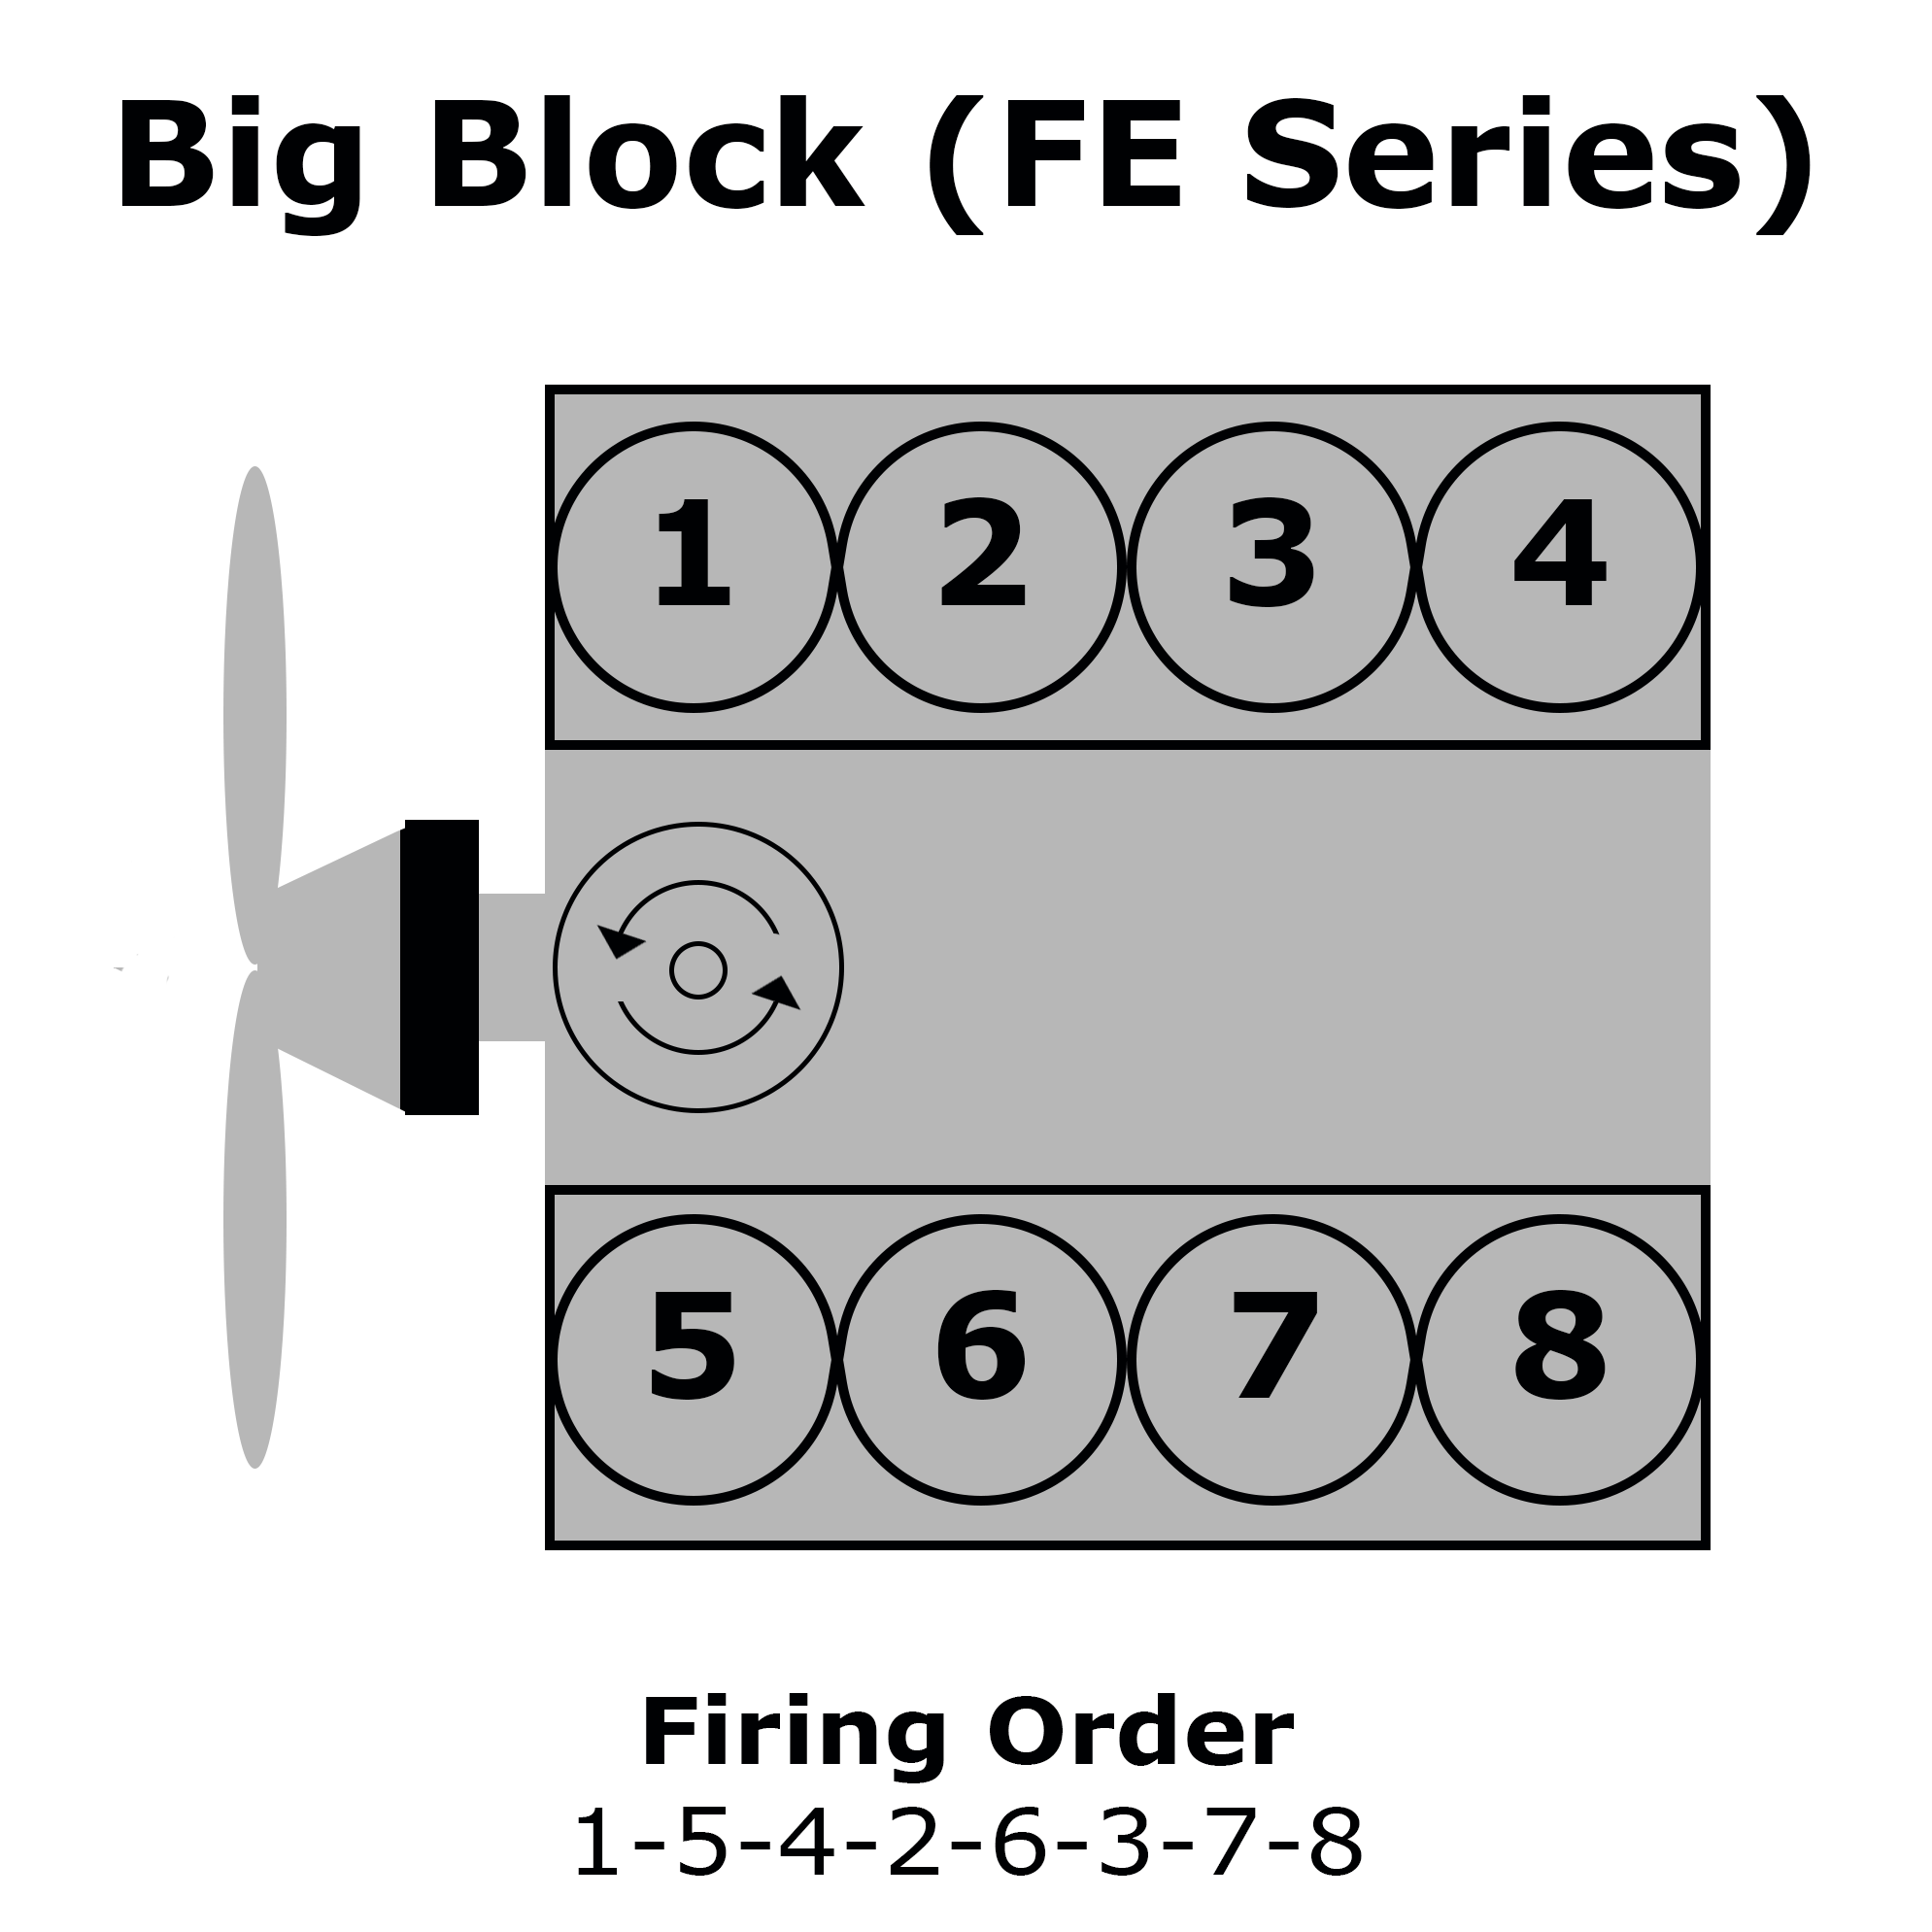 Ford Big Block (FE Series) Cylinder Numbering, Distributor Rotation, and Firing Order